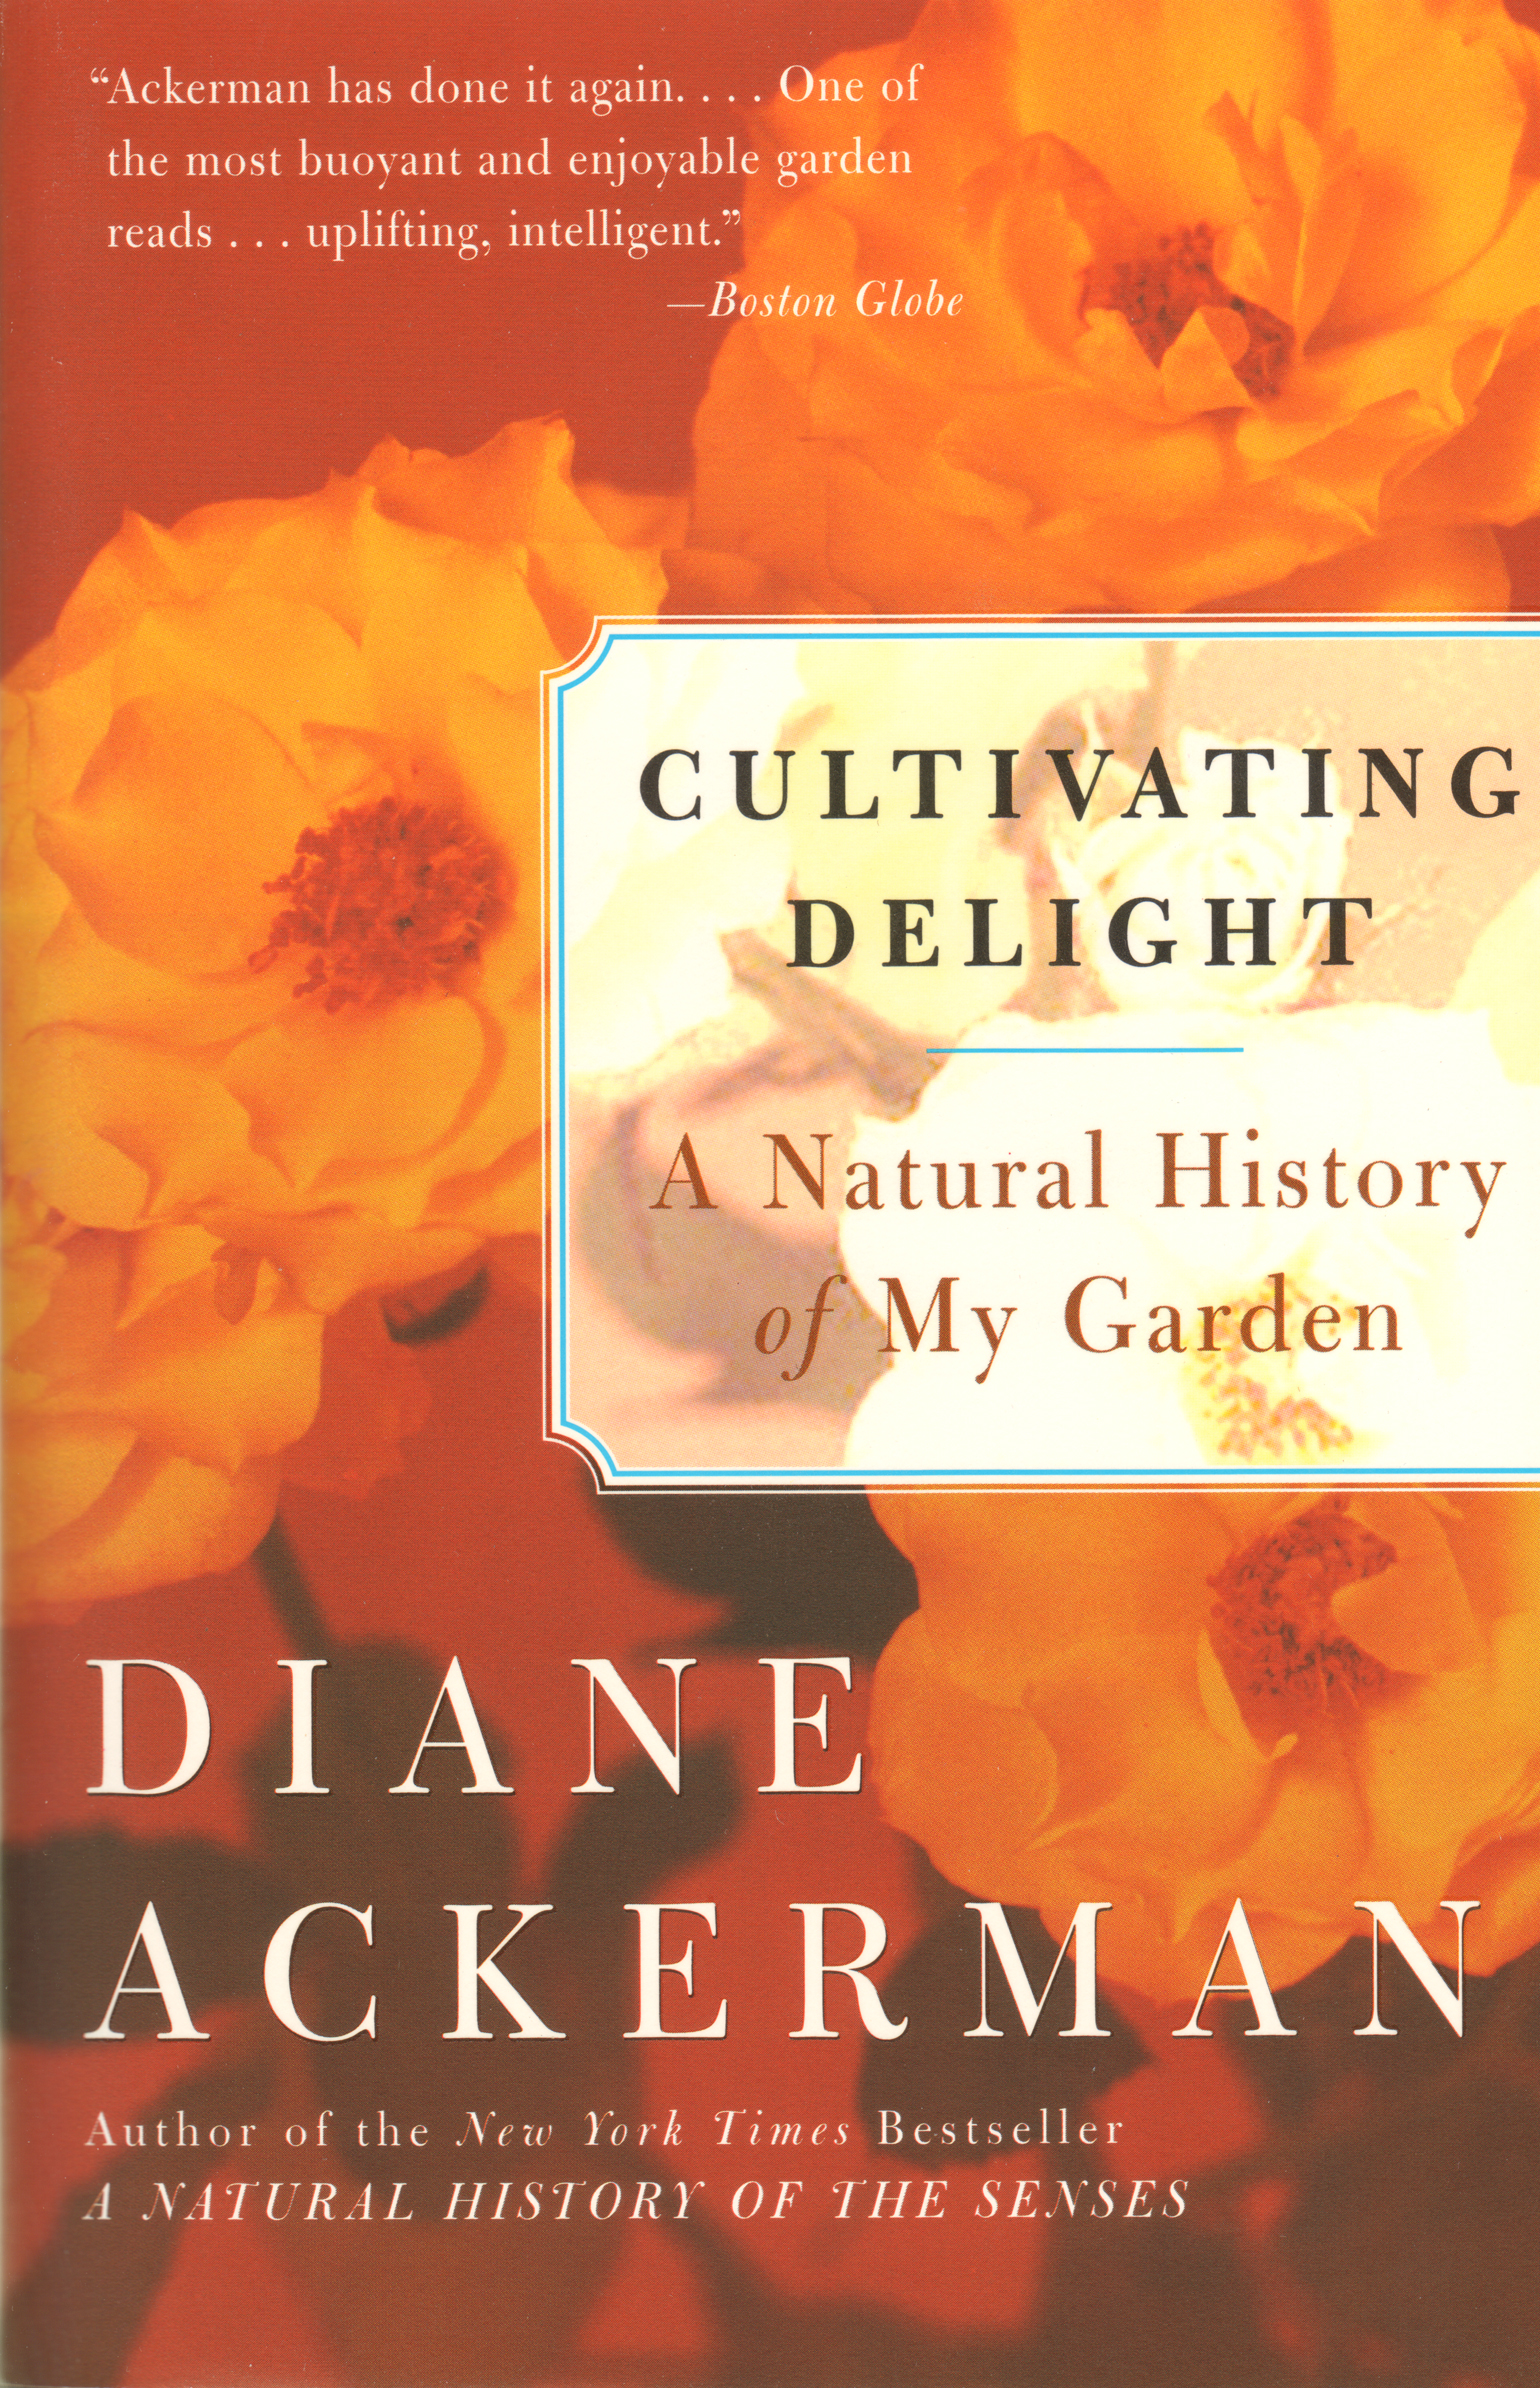 Cultivating Delight by Diane Ackerman